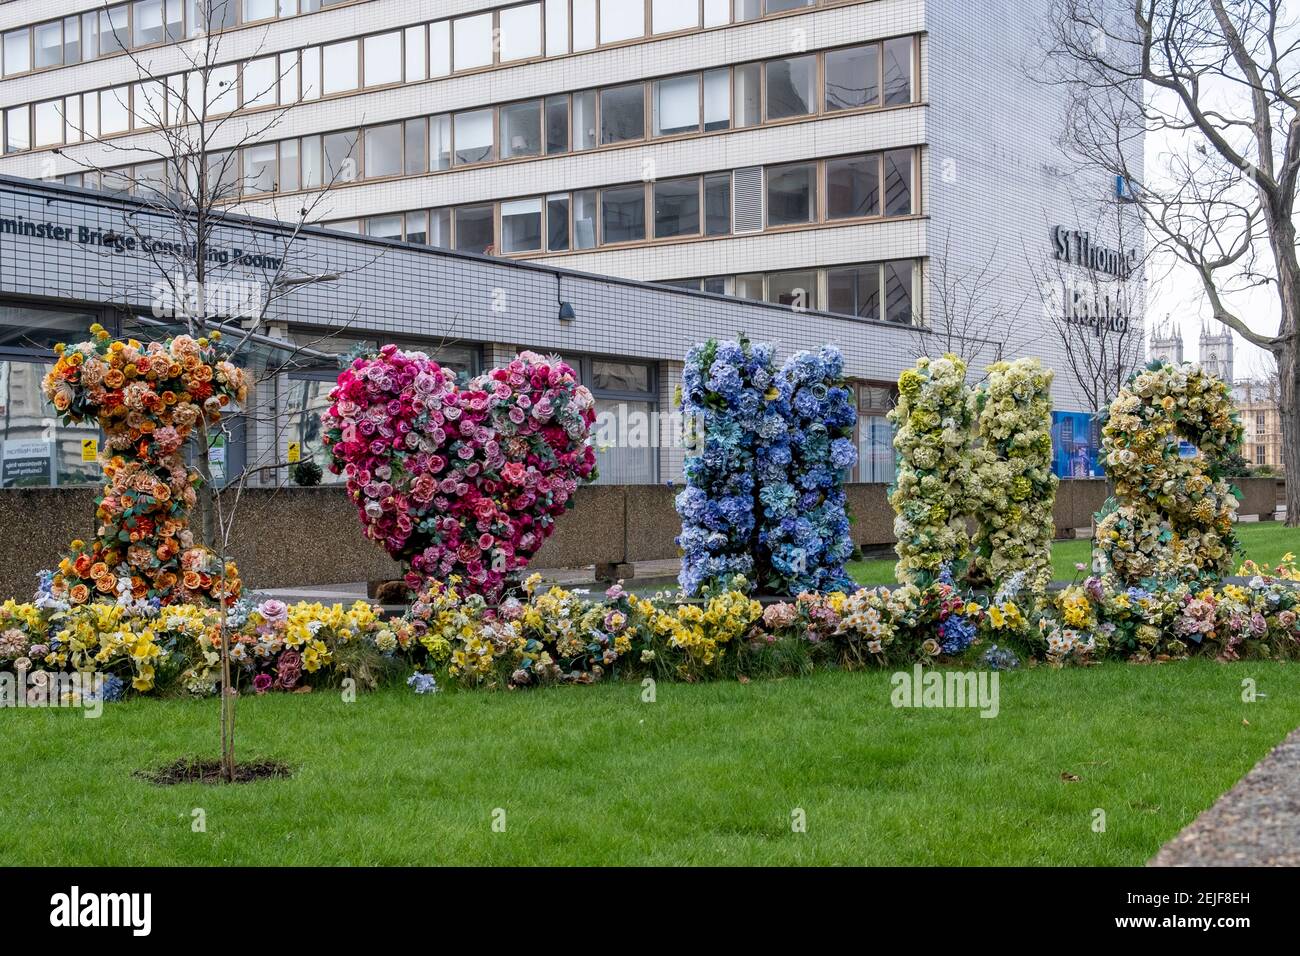 Floral tribute to workers in the NHS, at St Thomas' Hospital London at the height of the second wave of the Covid-19 Pandemic in February 2021 Stock Photo